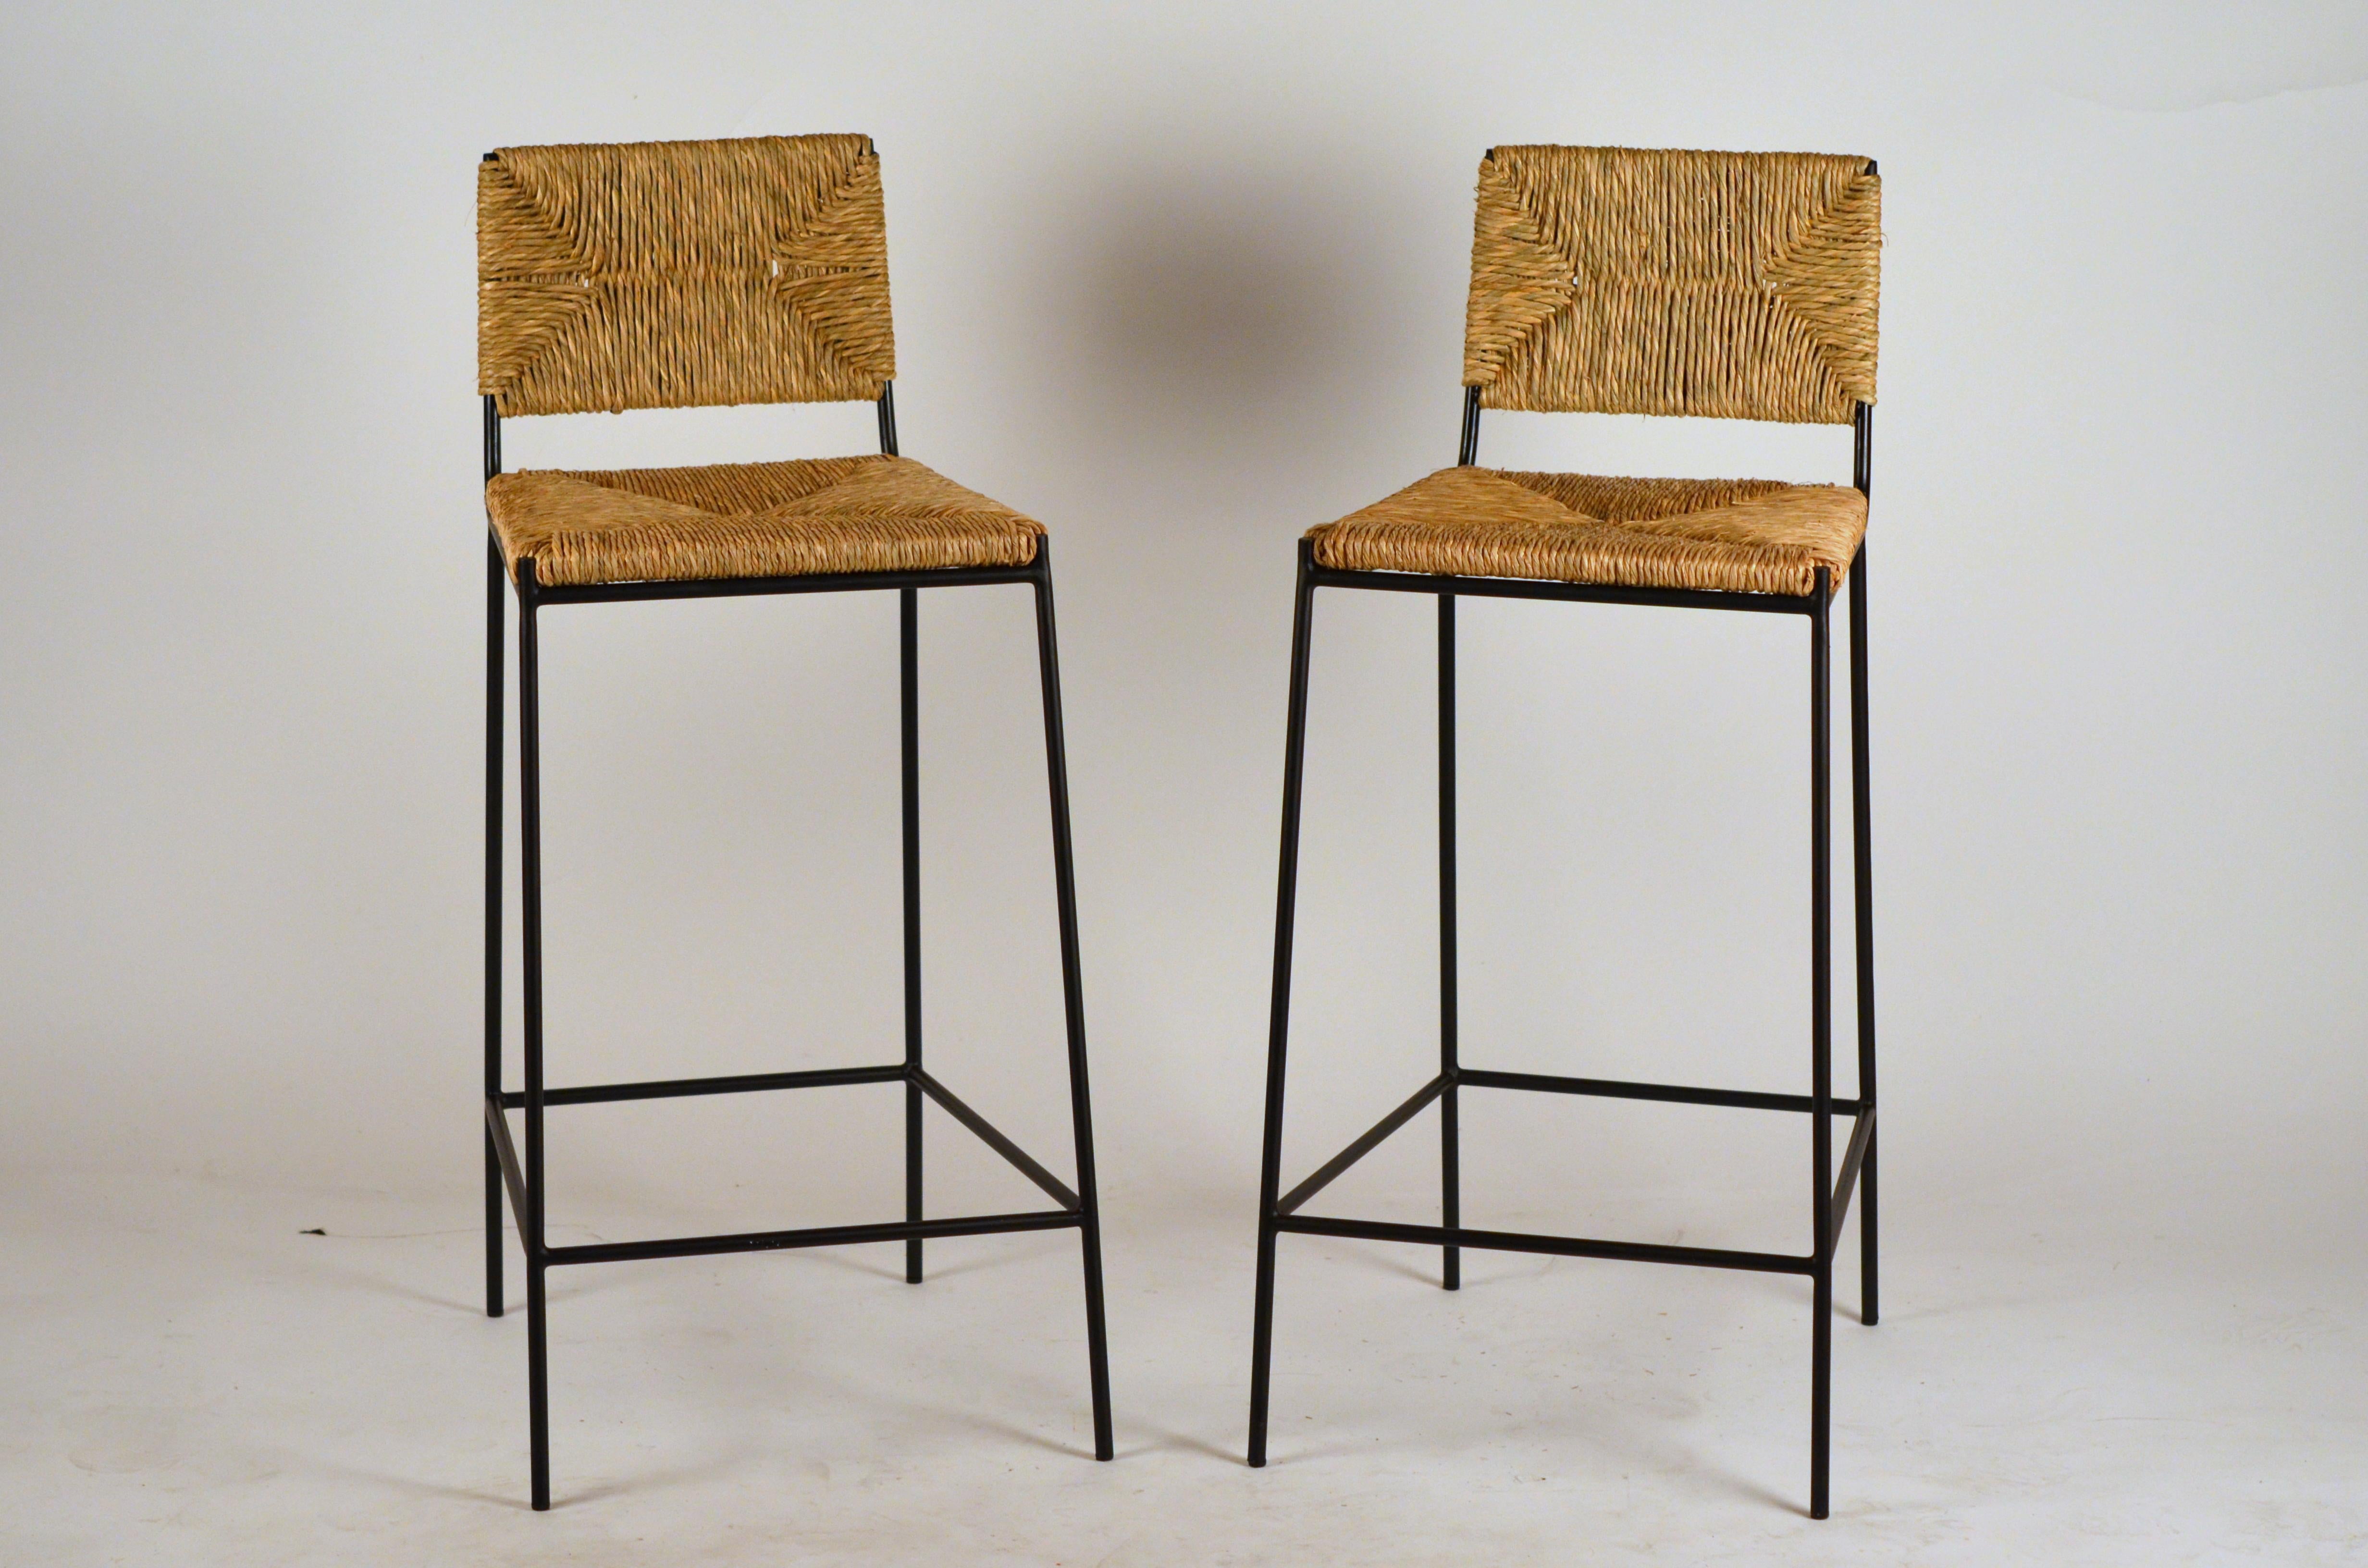 Pair of 'Campagne' counter height stools by Design Frères.

Chic combination of slender but sturdy powder coated steel frames with handwoven rush seats and backs. Extra support under the rush seat for durability. Durable plastic caps on the feet